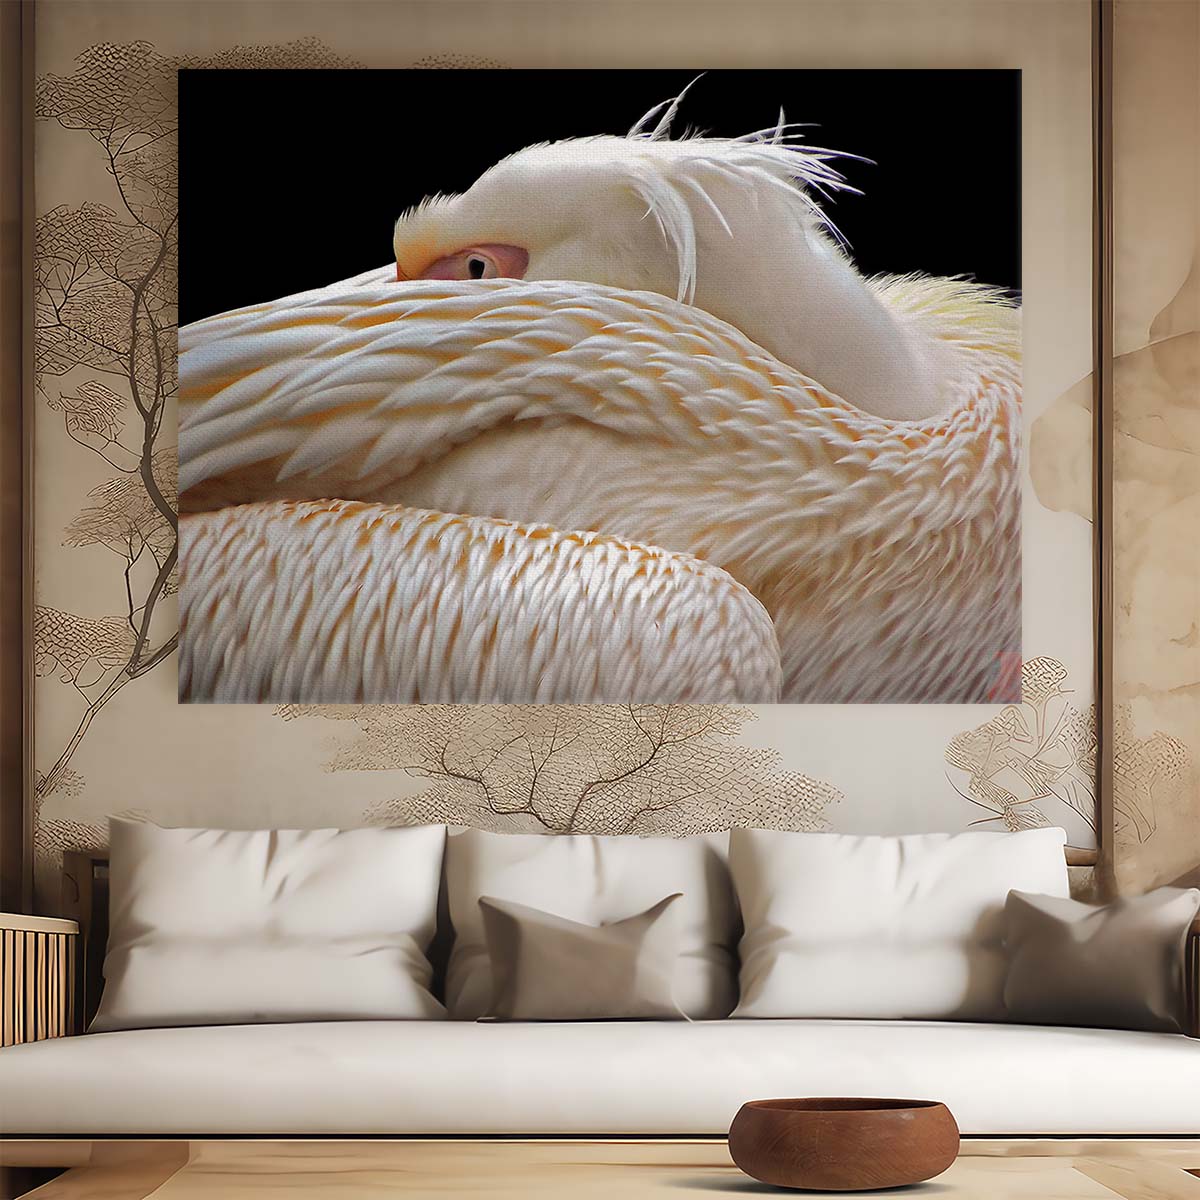 Abstract Hidden Pelican Curves Lyon France Wall Art by Luxuriance Designs. Made in USA.